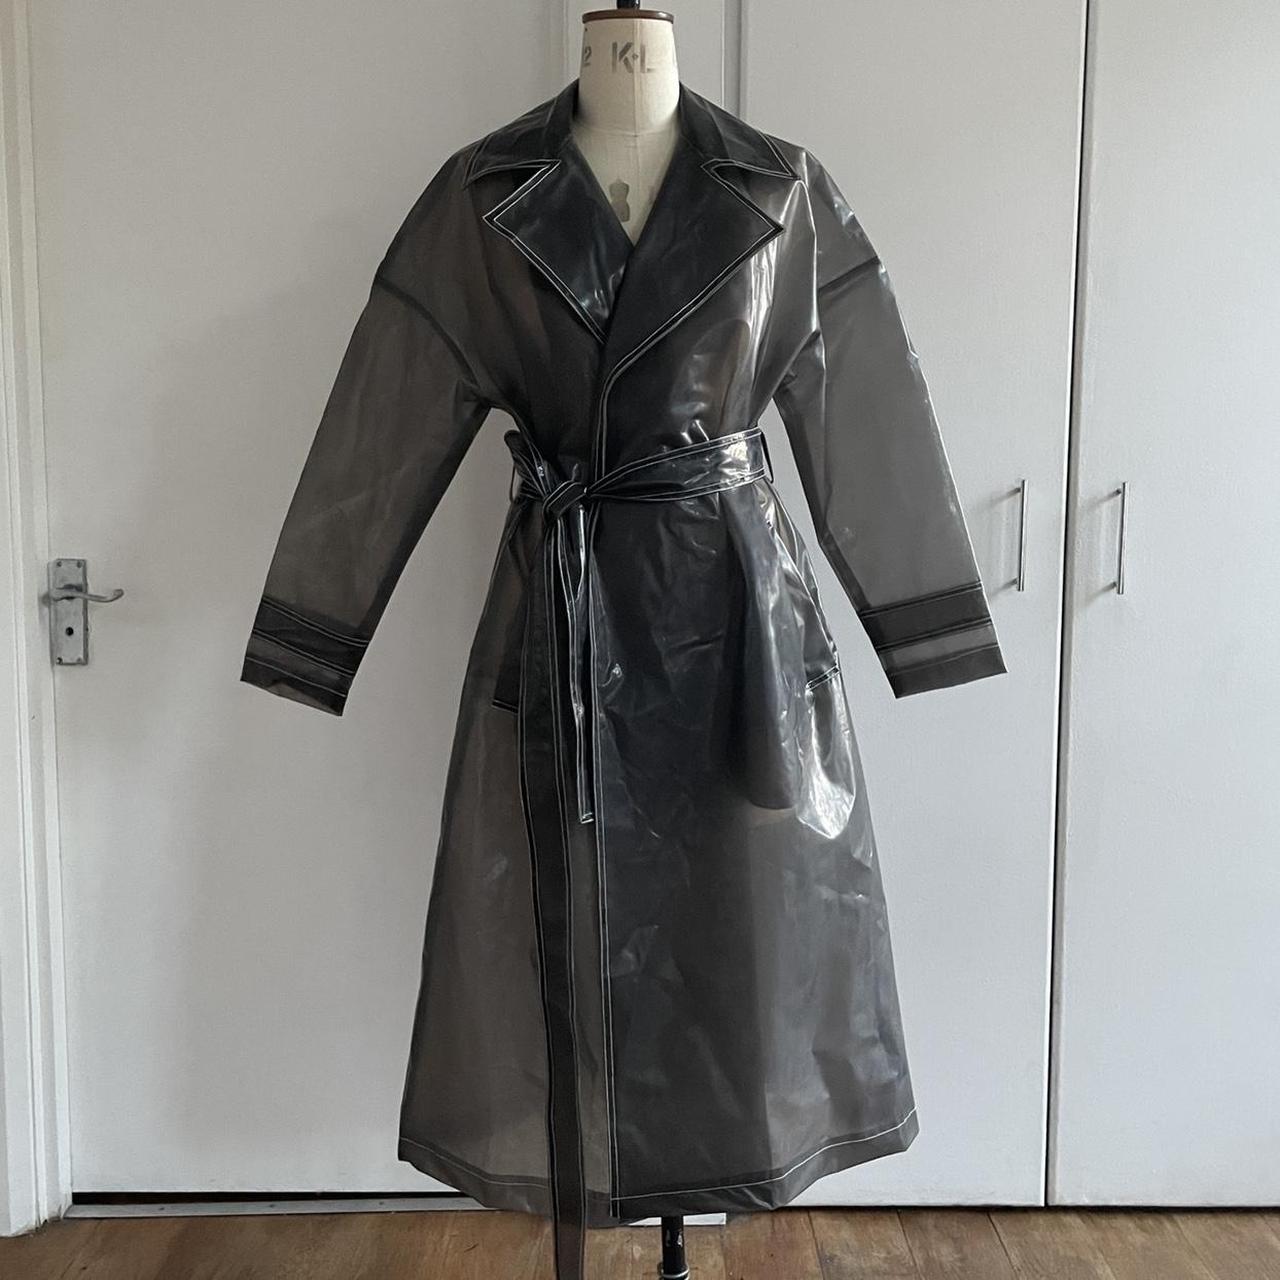 Grey pvc raincoat with side pockets Fit all sizes - Depop